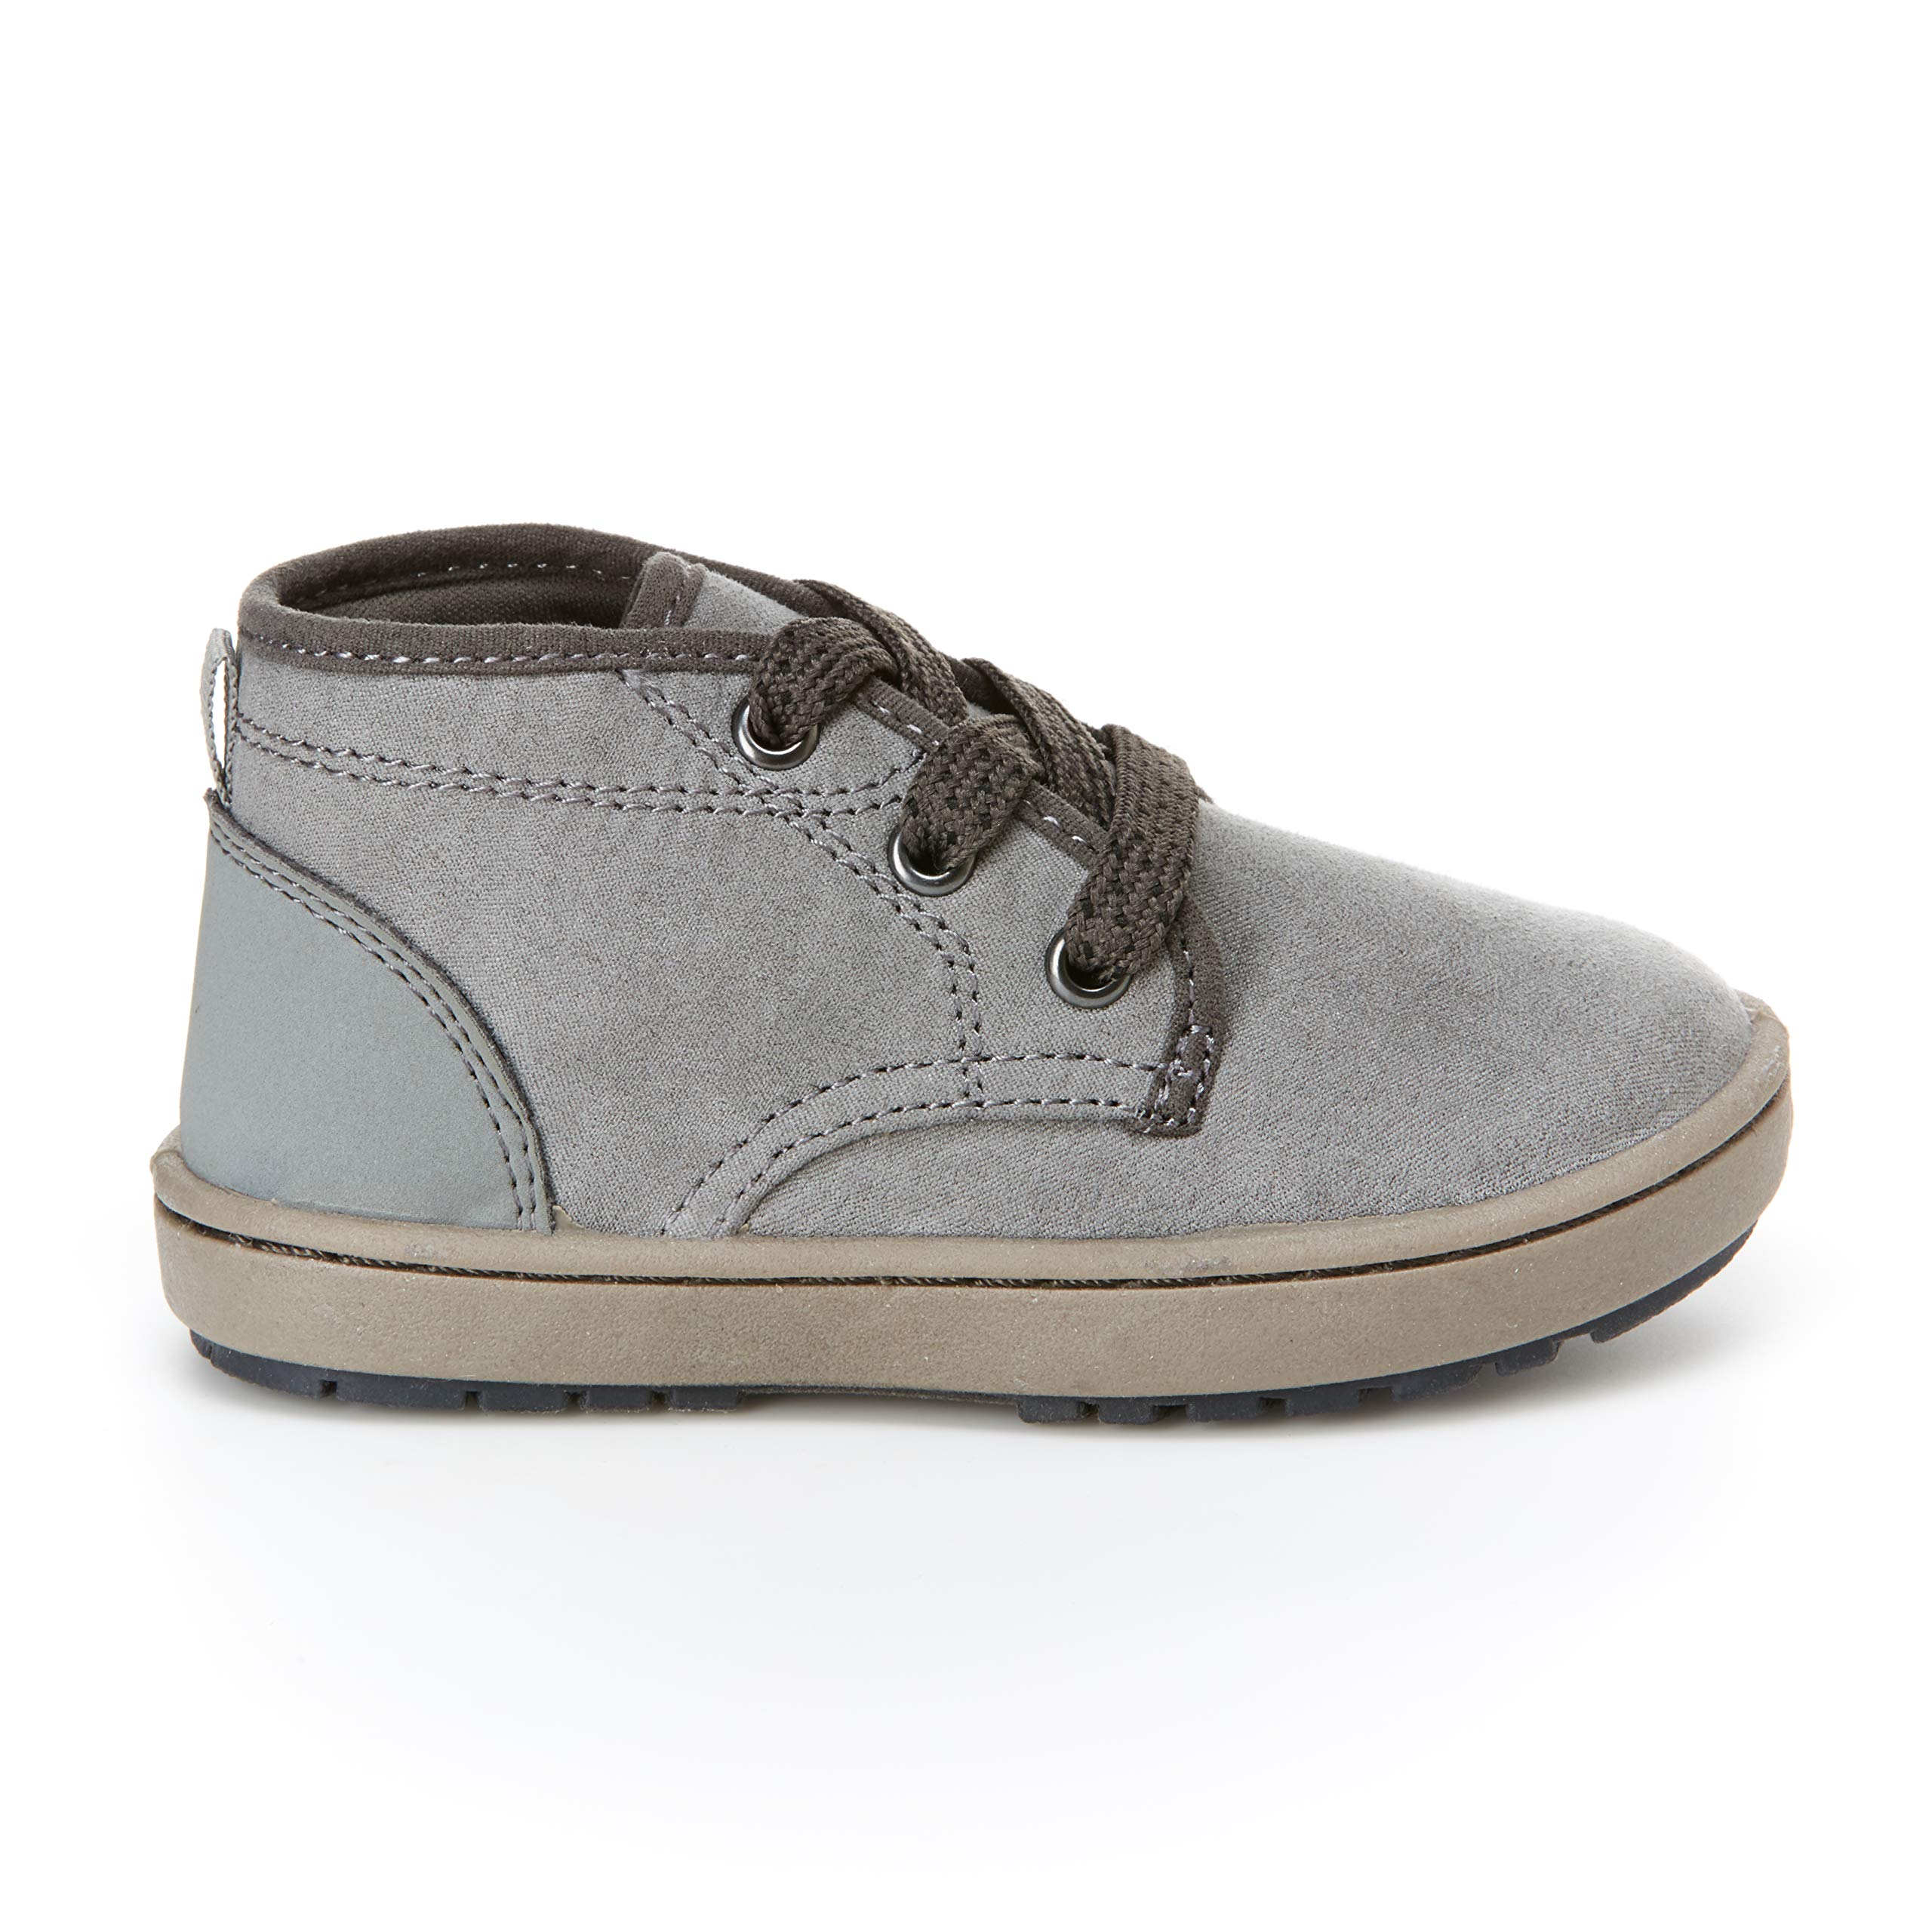 Simple Joys by Carter's Unisex Kids and Toddlers' Noah Chukka Boot